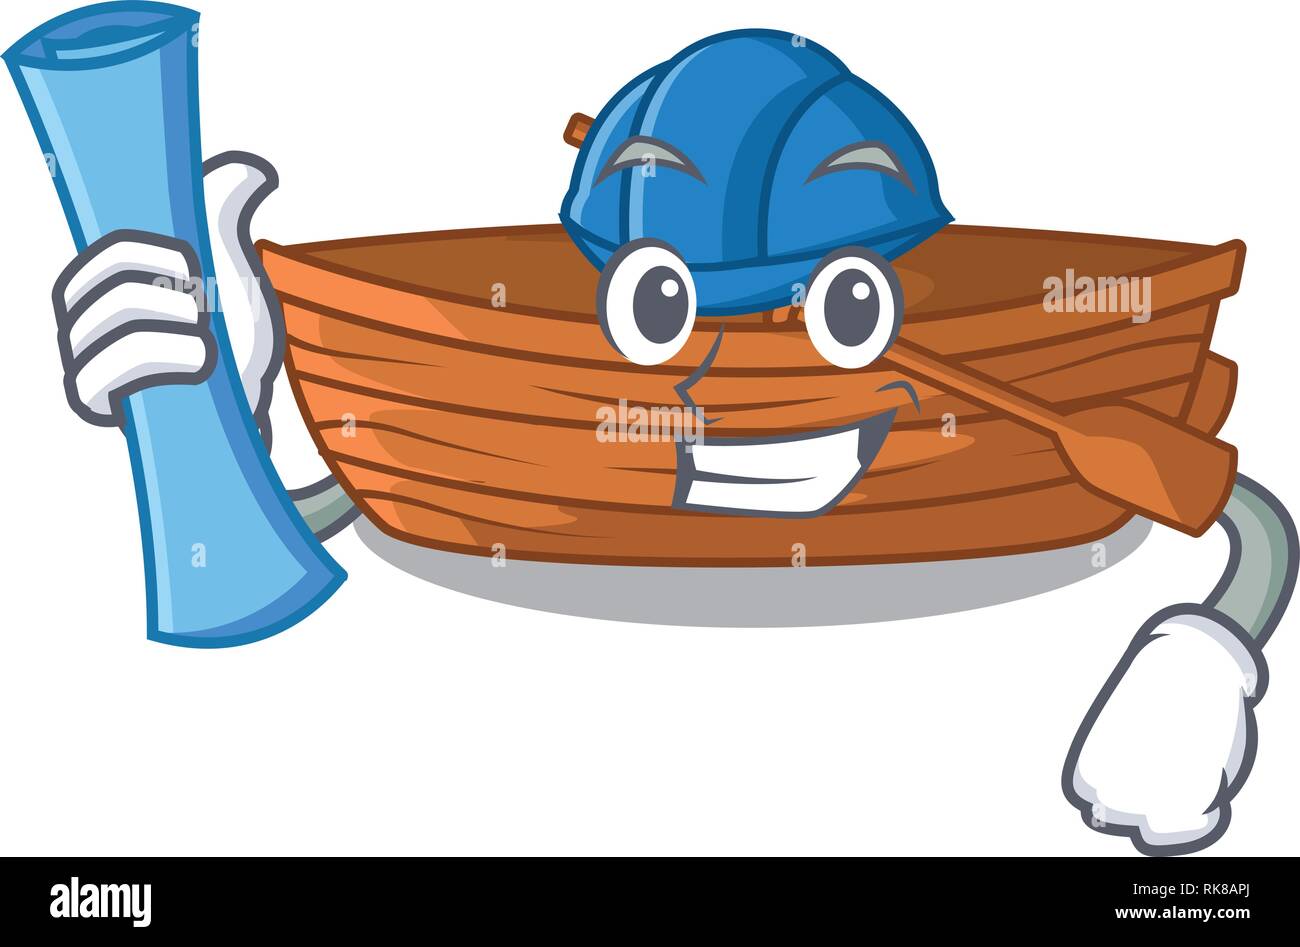 Architect wooden boats isolated with the cartoons Stock Vector